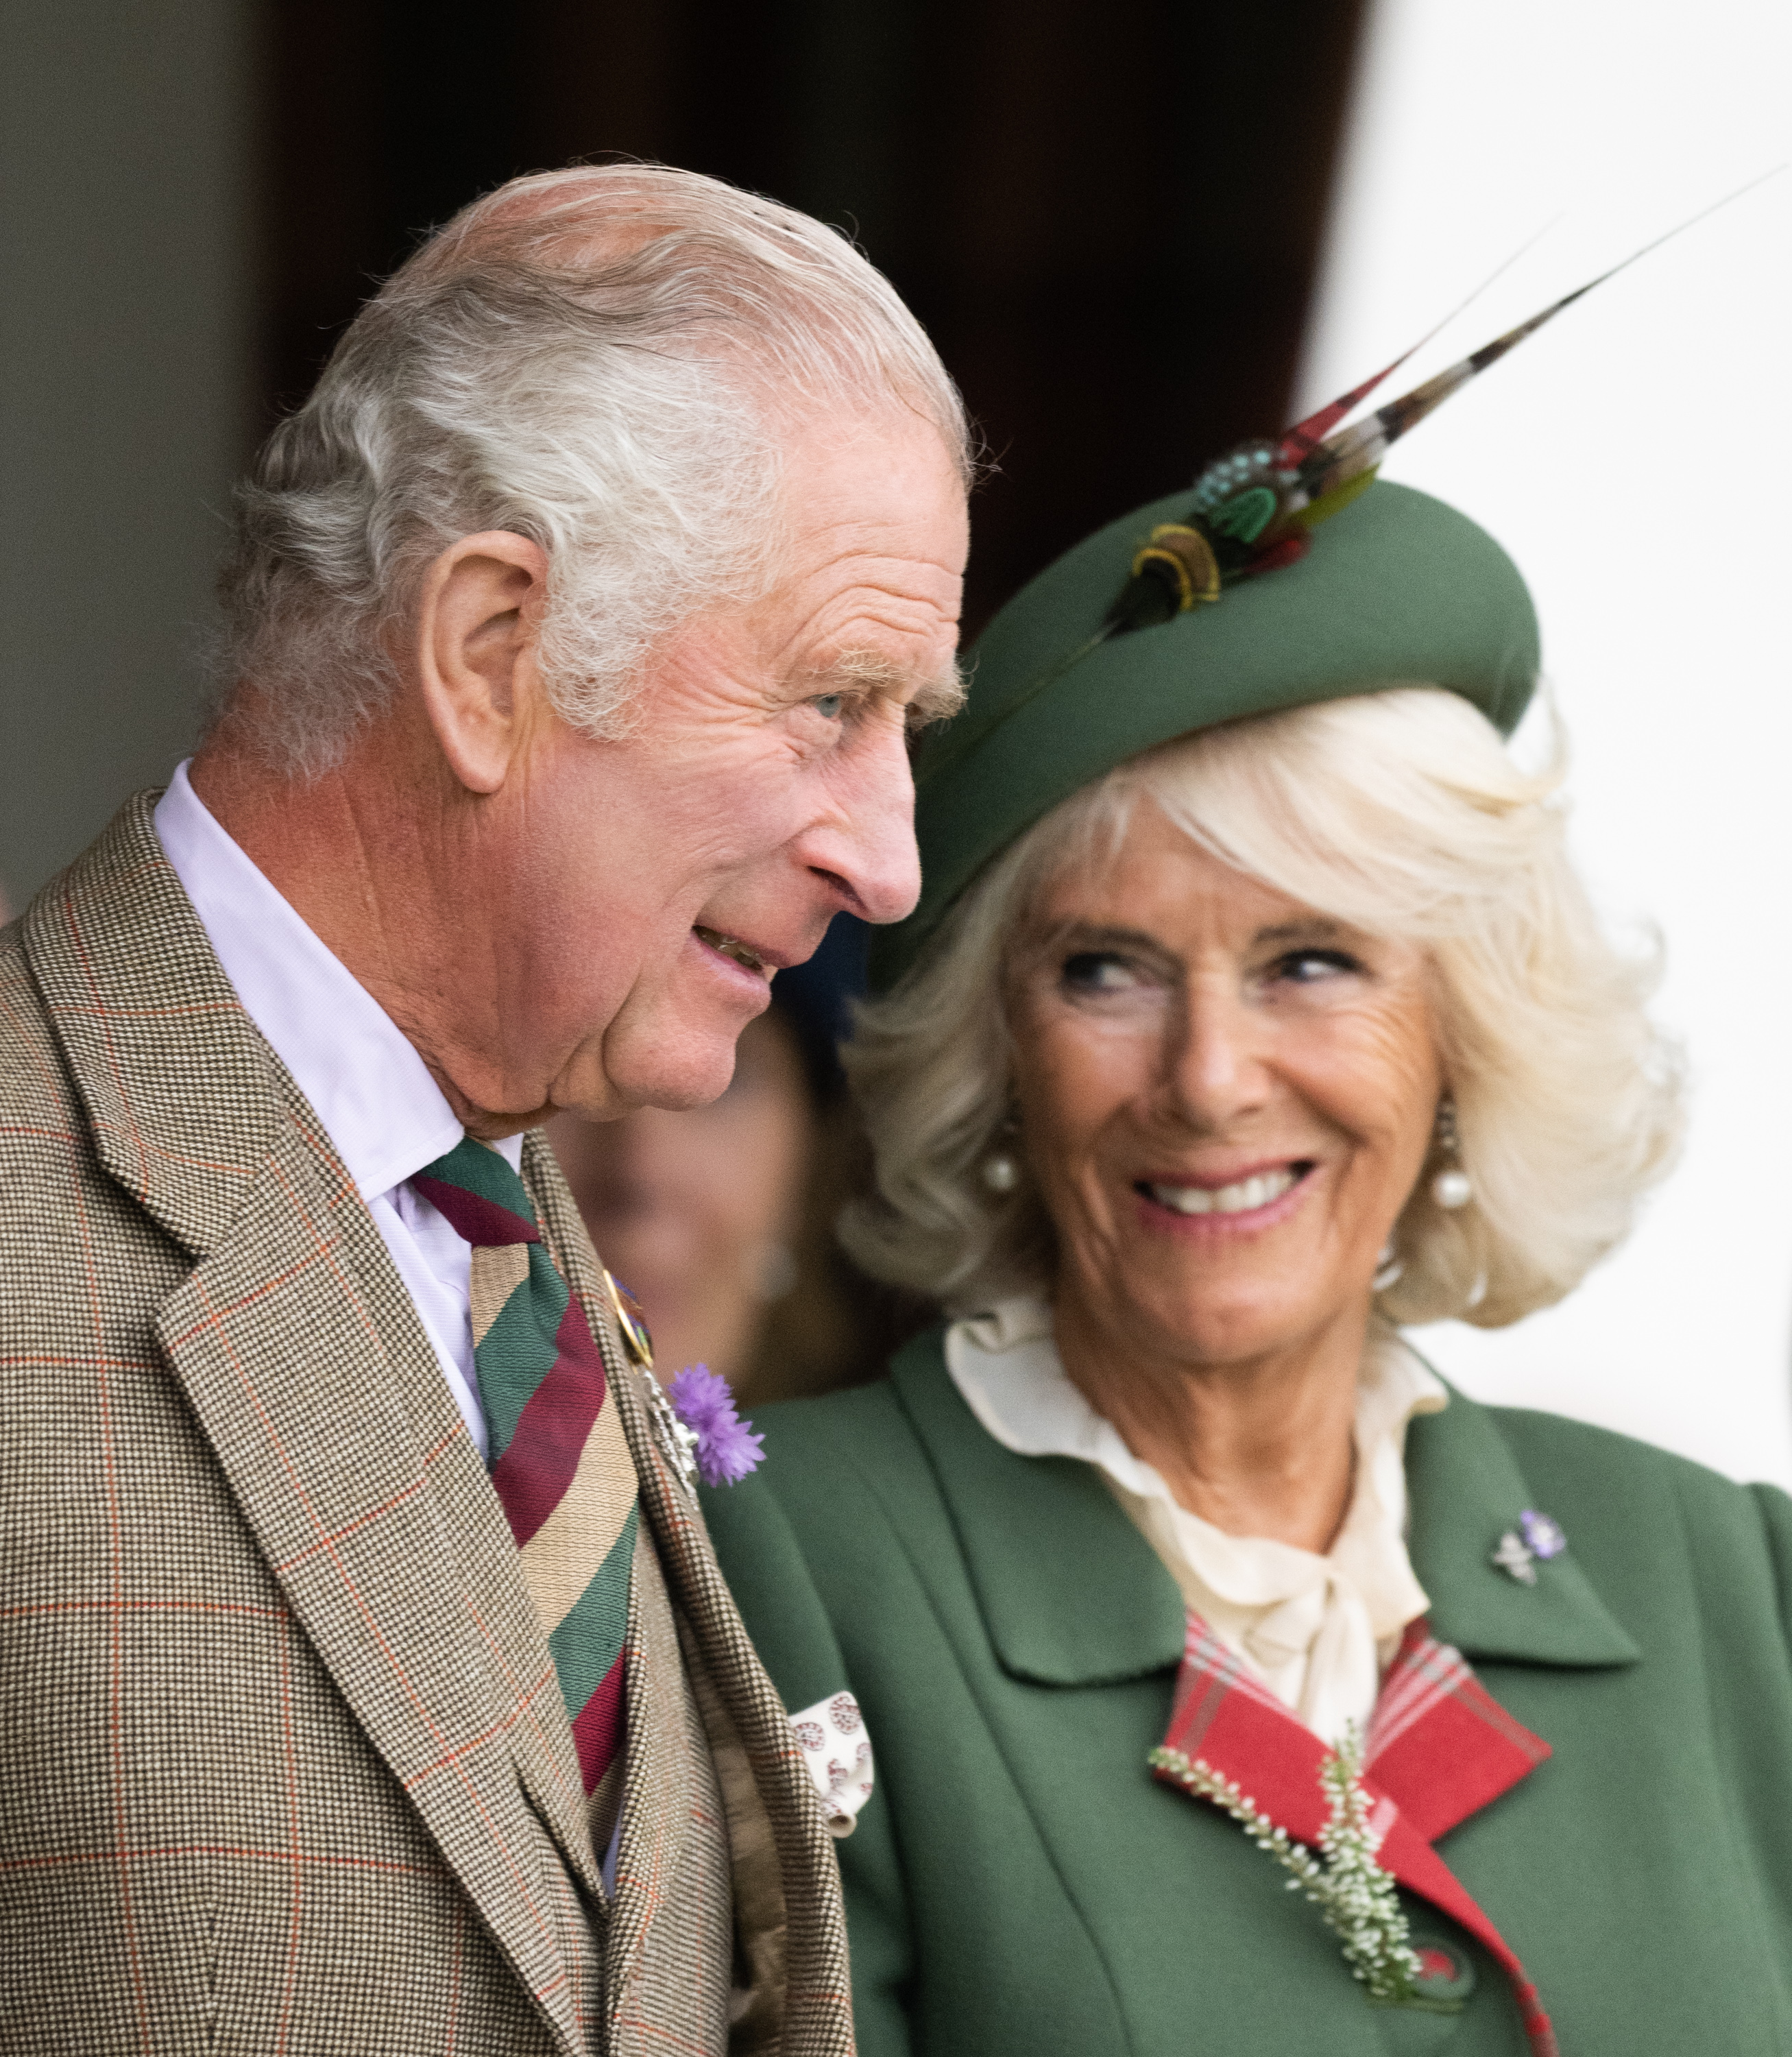 <p><span>On Dec. 11, 2022, King Charles III and wife Queen Consort Camilla released an </span><a href="https://twitter.com/RoyalFamily/status/1602061165600940032/photo/1">image</a><span> of their annual official Christmas card on their @RoyalFamily Twitter account. It features this image of the couple, which was taken at the Braemar Highland Gathering (the most famous of the Highland Games) in Scotland on Sept. 3 -- five days before<a href="https://www.wonderwall.com/celebrity/royals/best-photos-from-queen-elizabeth-ii-funeral-king-charles-princes-william-prince-harry-george-charlotte-kate-meghan652347.gallery"> the death</a> of Queen Elizabeth II, and five days before Charles became king. The message on the monarch's card reads, "Wishing you a very Happy Christmas and New Year."</span></p>